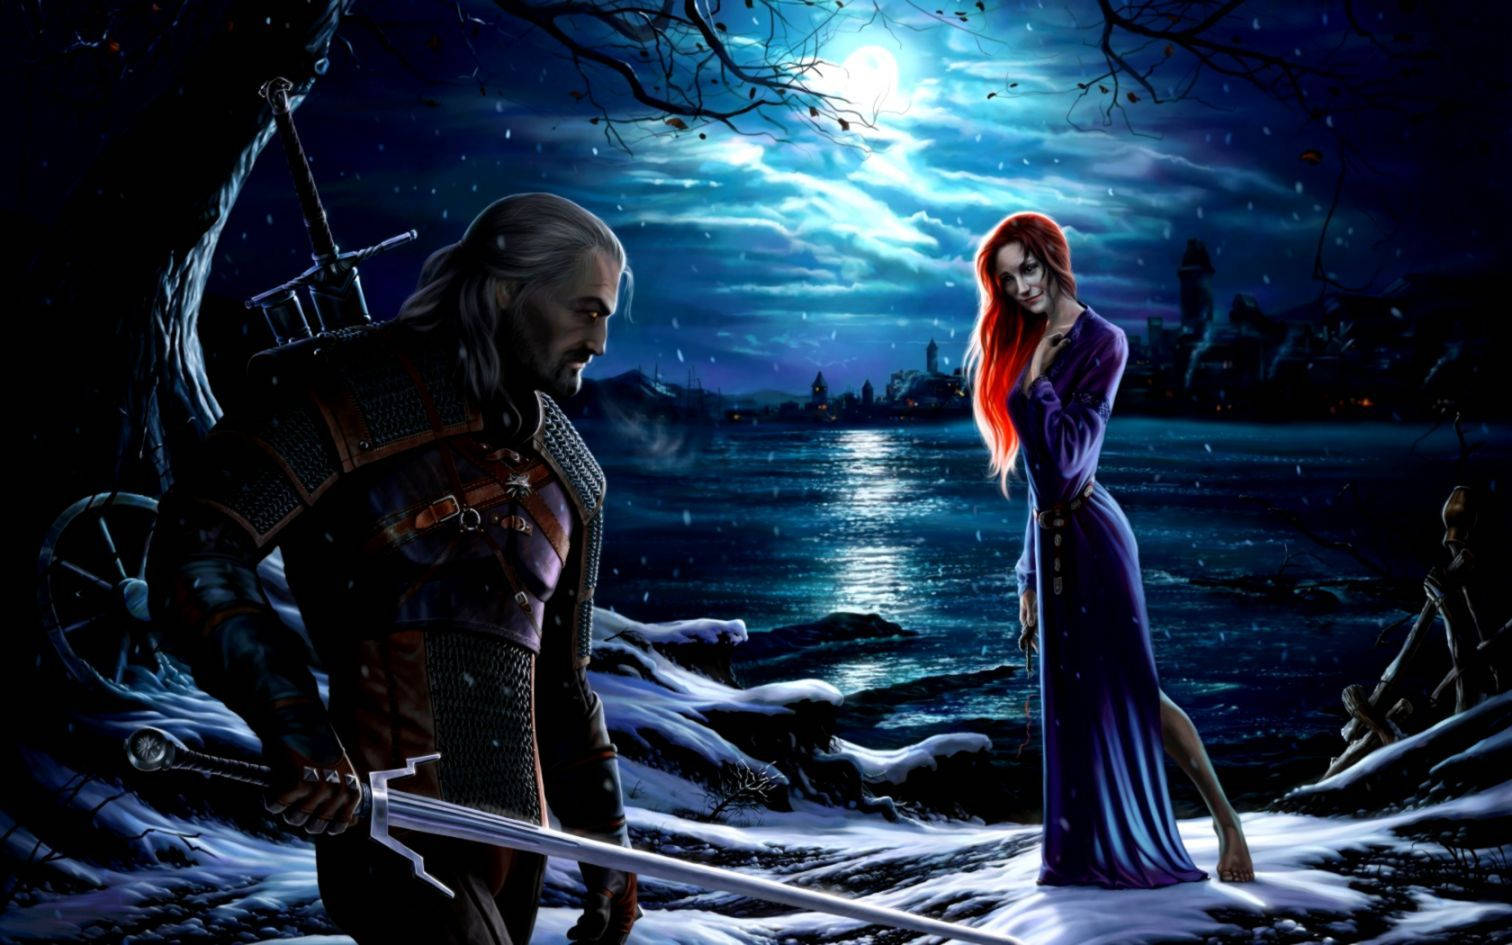 A romantic evening by the lake with Geralt and Triss in the Witcher 3. Wallpaper